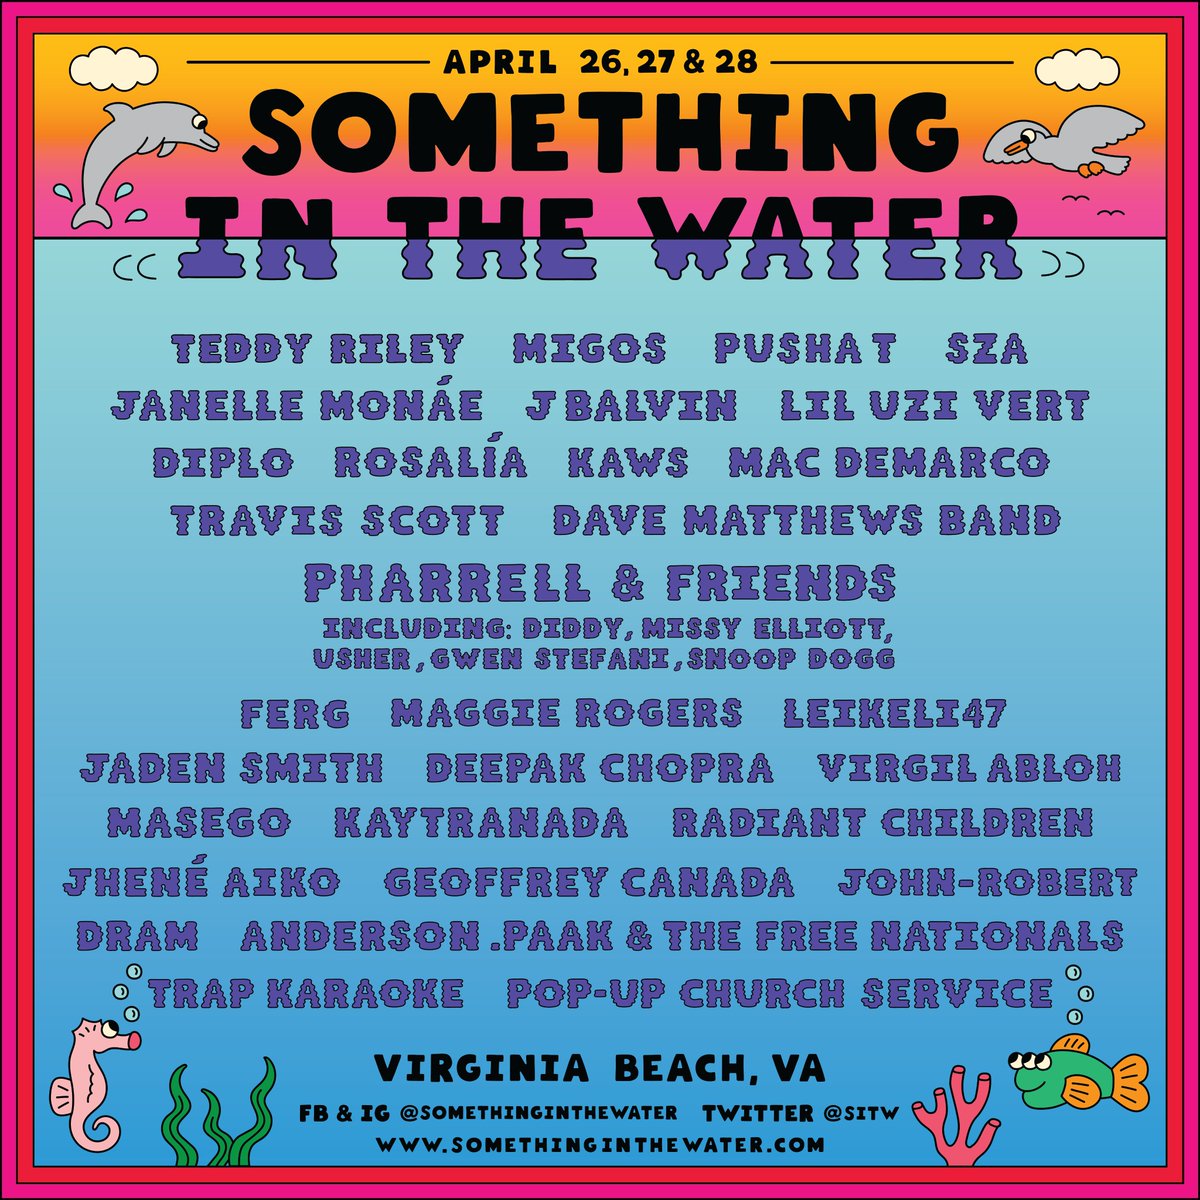 Added some friends! Tickets to @SITW on sale now at https://t.co/Elz7higDnf ⚡️????????????✊????
See you in VA!  #SITWfest https://t.co/FdmN0HmKKR